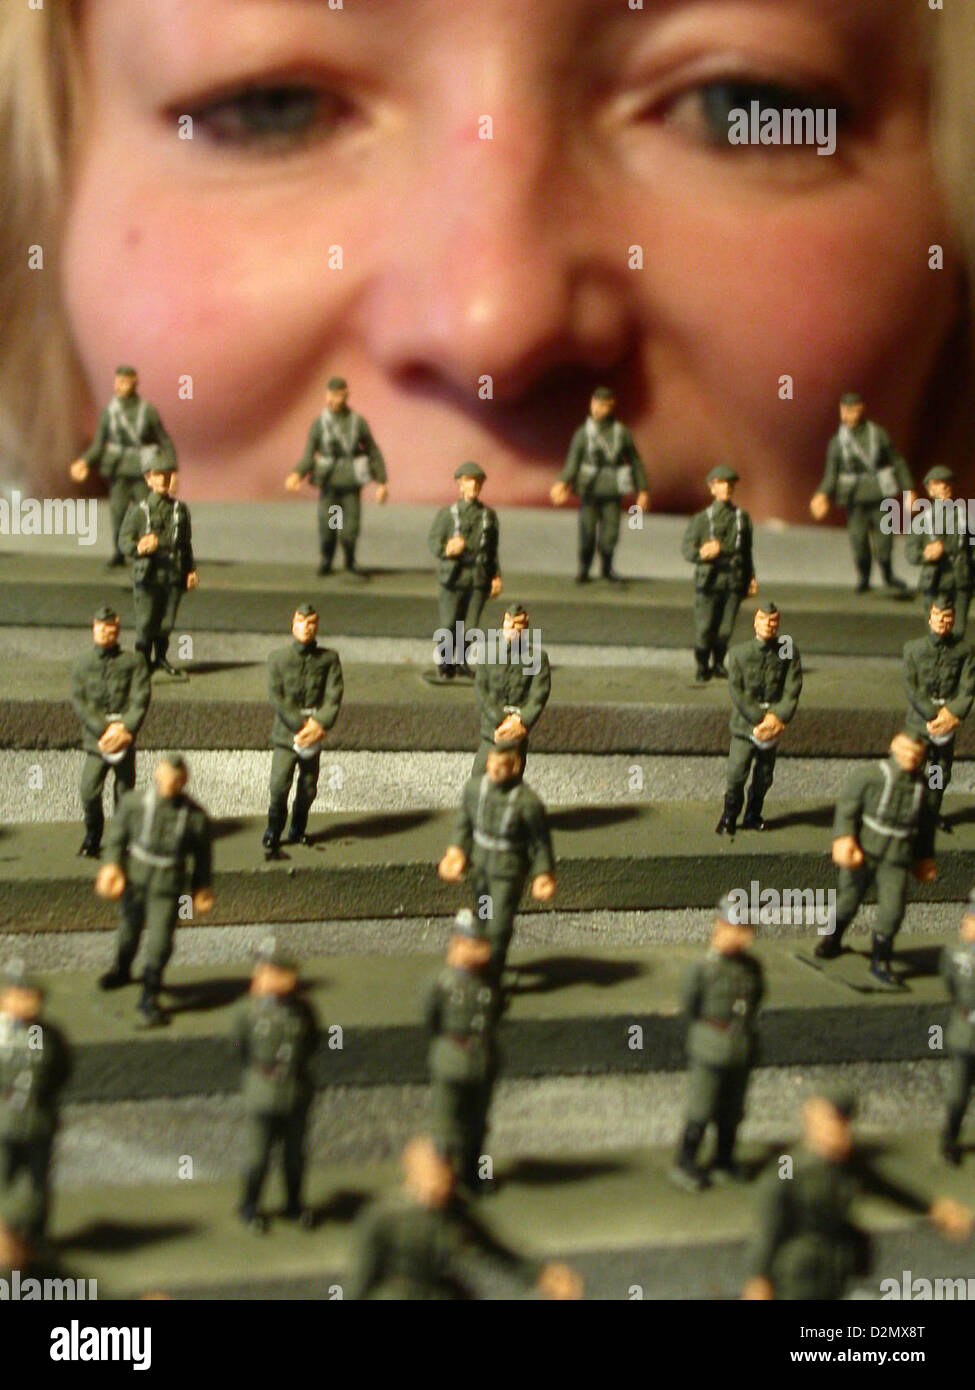 Tin figure painter Angelika Hauser looks at miniature NVA soldiers (National People's Army of the GDR) of the scale 1:87 at the scale model company Ritter C.B. von Krauthauser in Waltersdorf, Germany, 17 January 2005. The miniature models are around the size of a two-cents-coin. The company specialized on models of the First and Second World War, as well was GDR vehicles. The ideas come from what one can find on decaying industrial sites, museums and old photographs. There are around 200 dealers and 100 collectors in Germany, Austria, Switzerland and the US ordering the products of the company Stock Photo